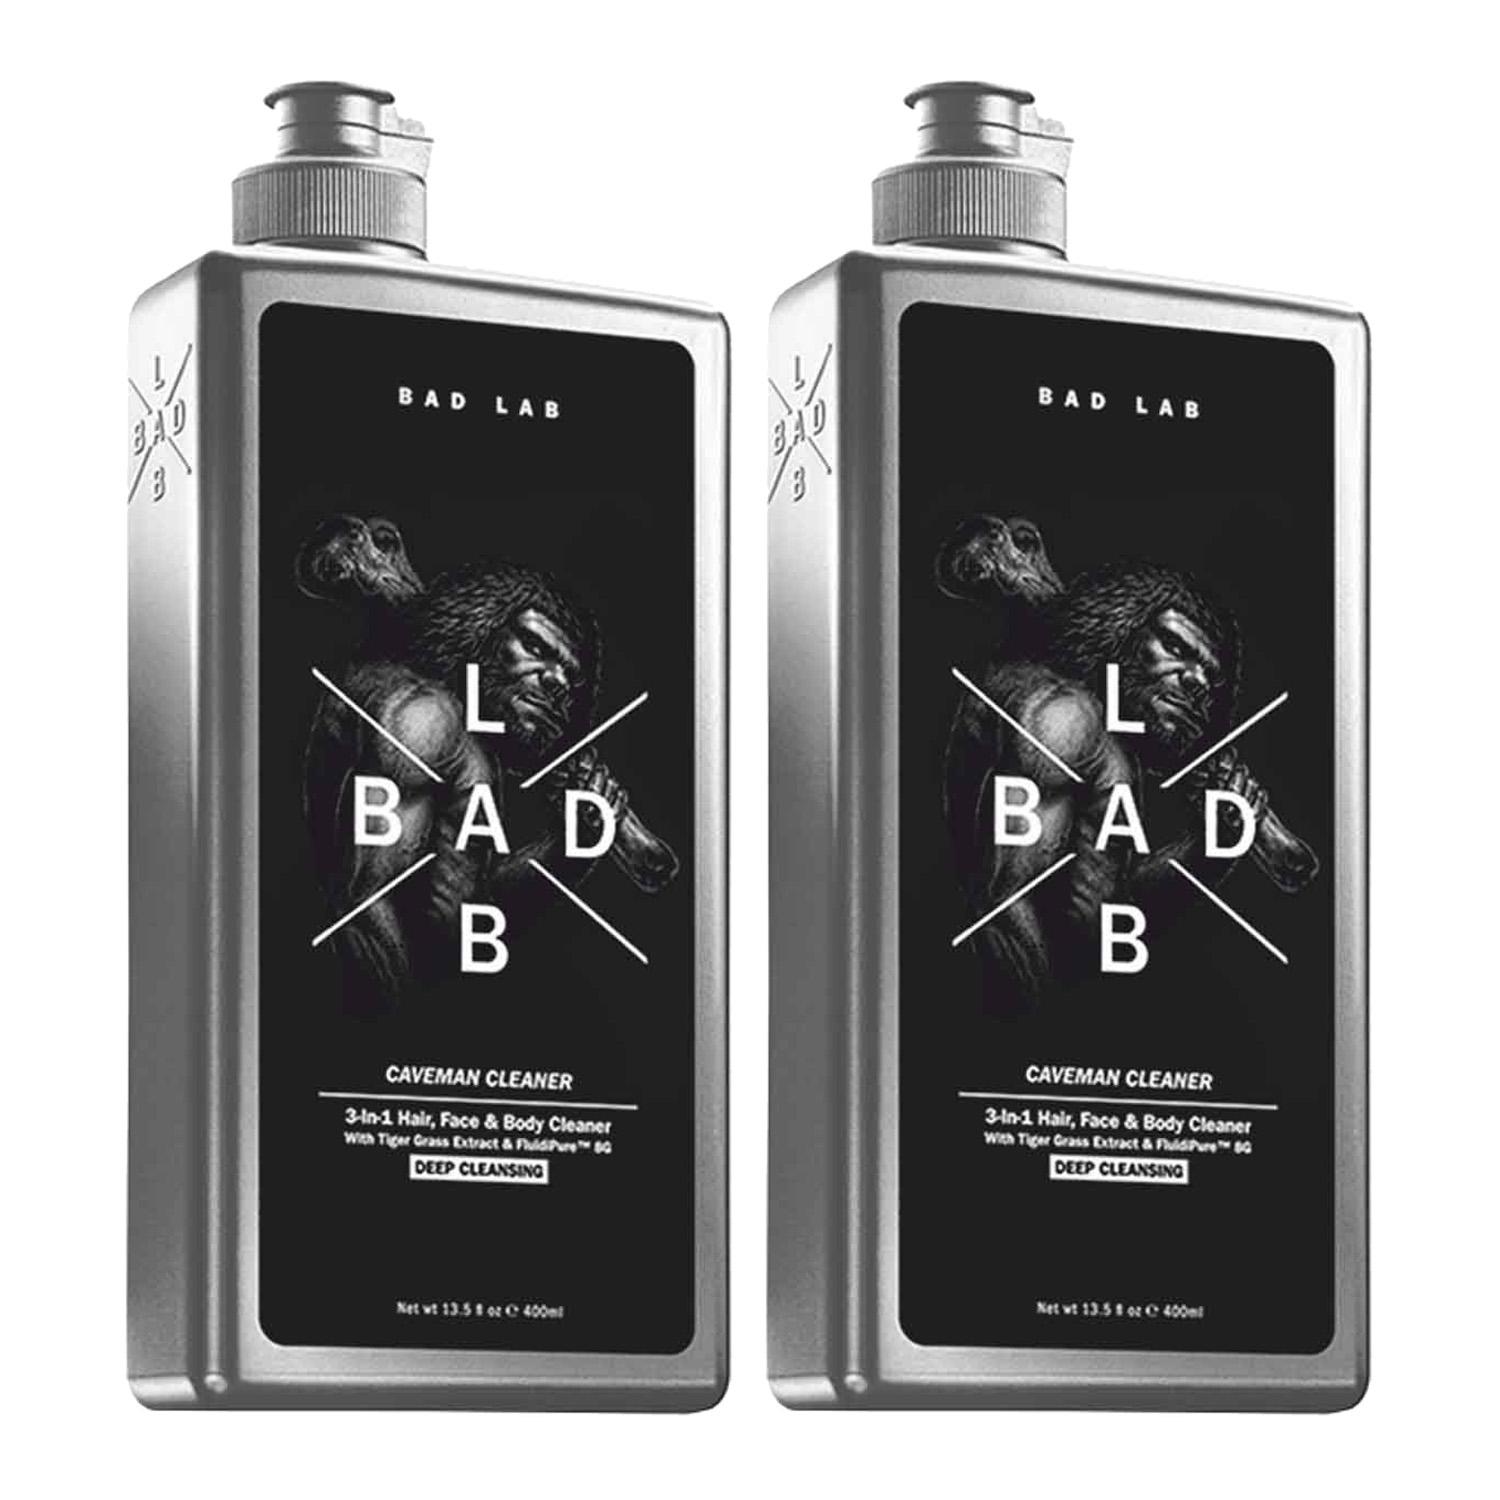 Bad Lab Caveman Cleaner 3-In-1 Hair, Face, Body Cleaner Deep Cleansing (400 ml) (Pack Of 2)